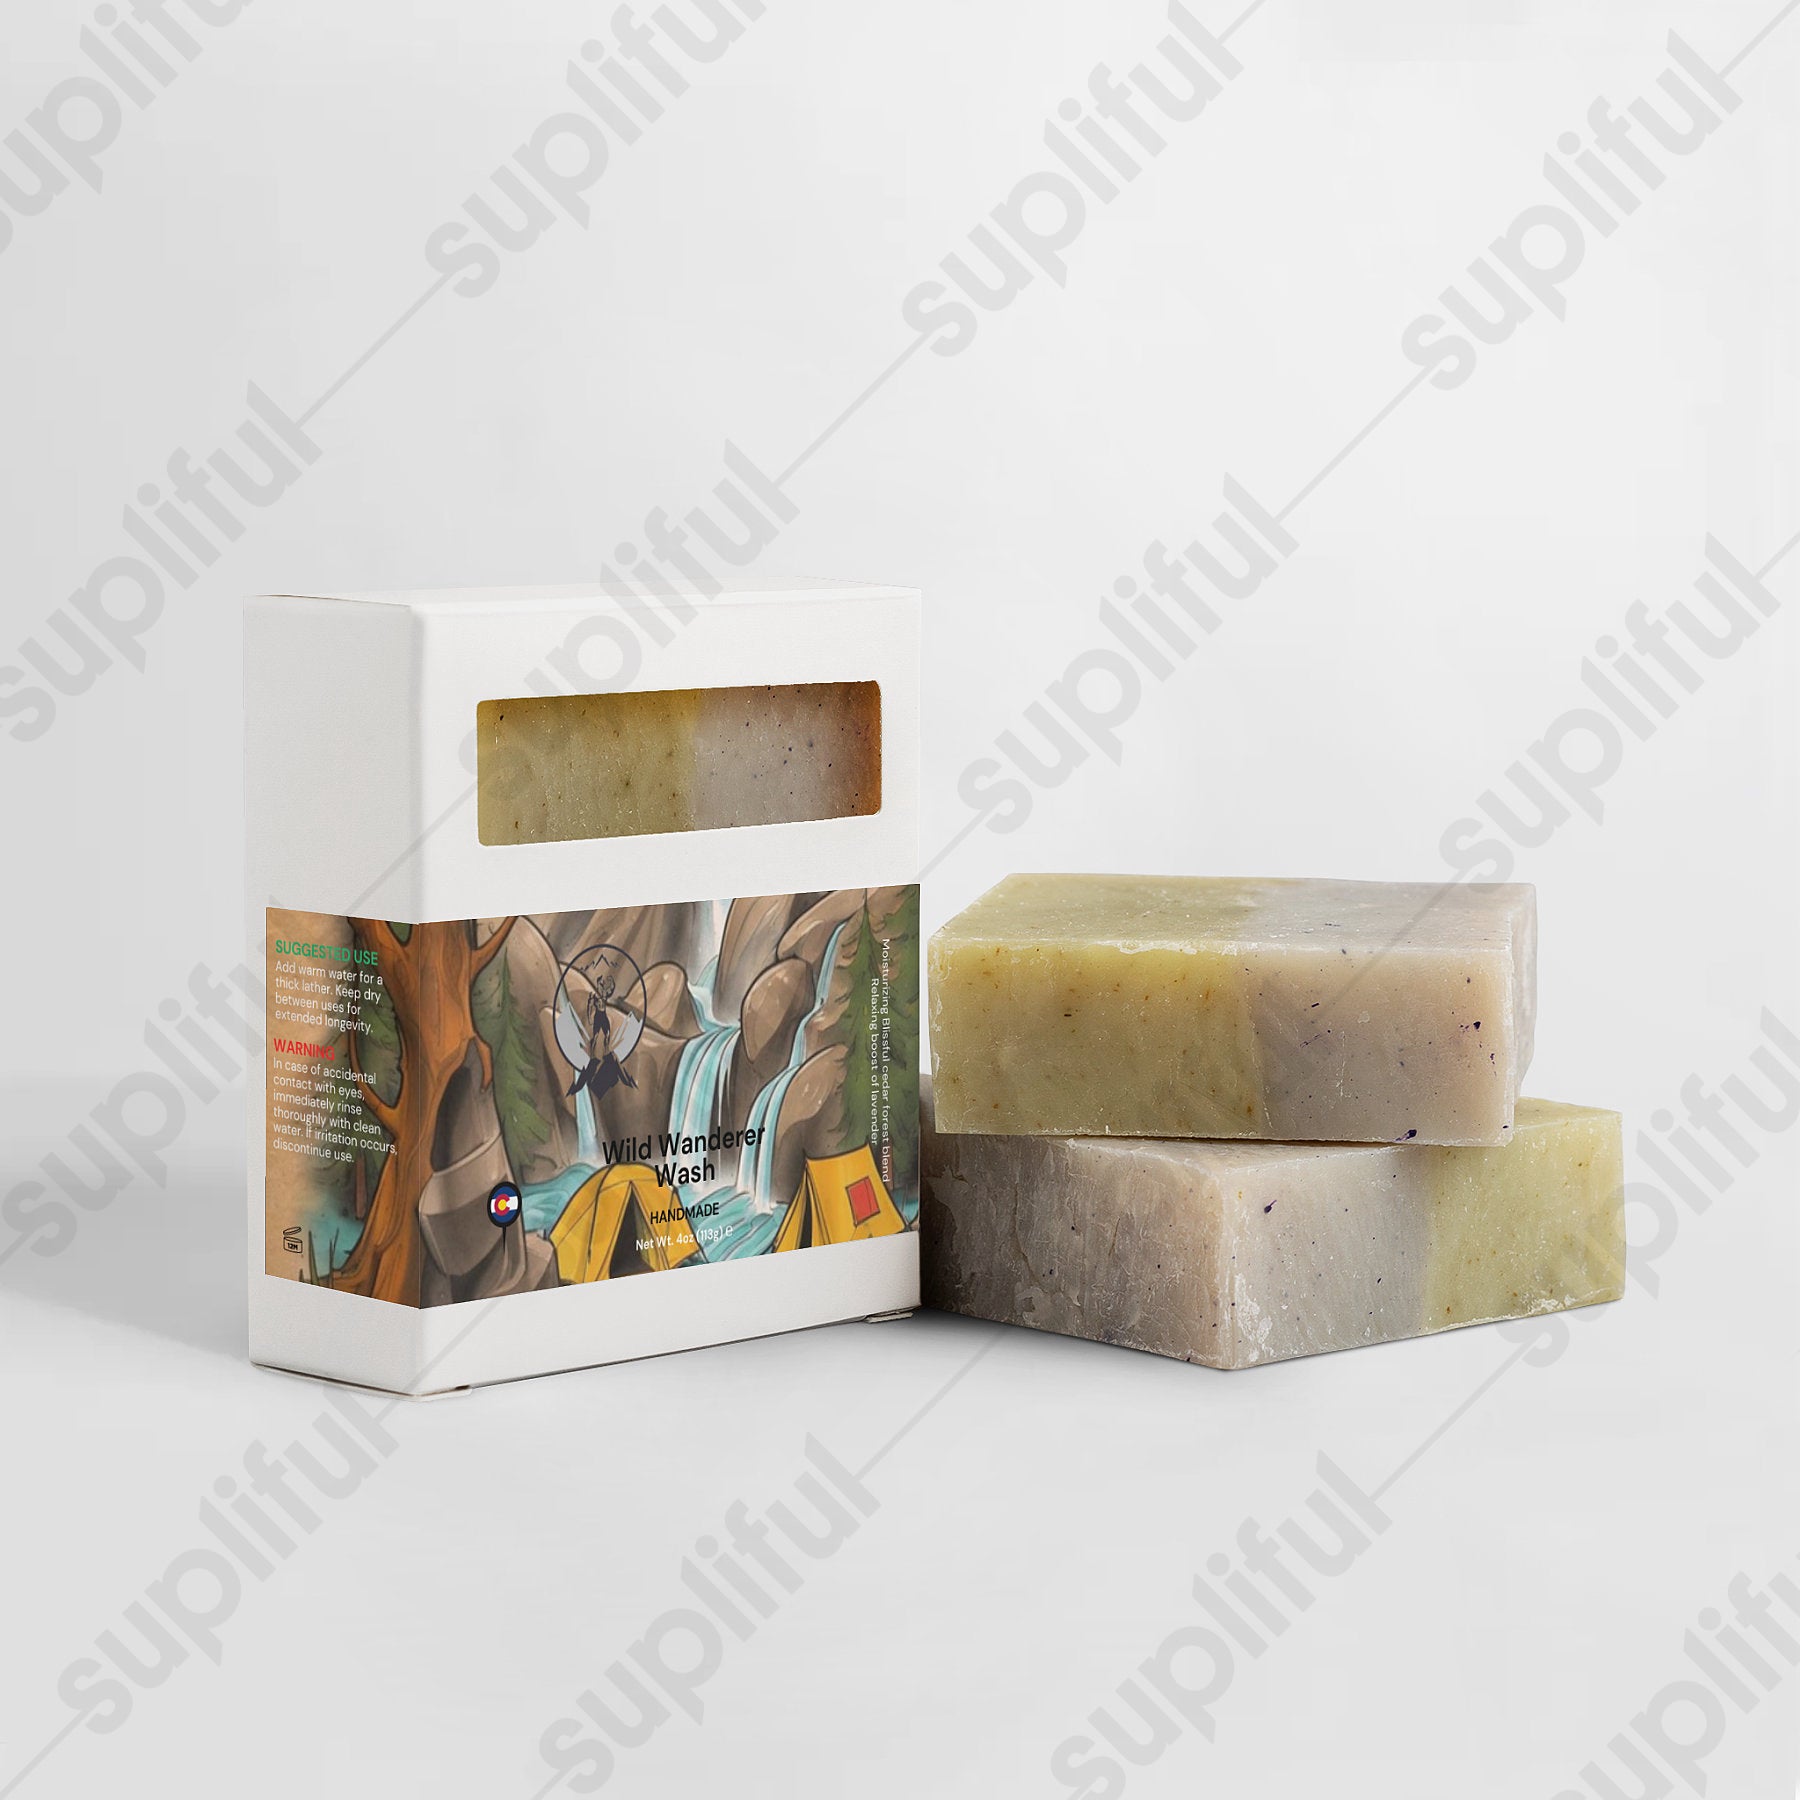 Wild Wanderer WashPersonal Care and BeautyIndulge in the serenity of nature with our Handmade Trail Walk Soap—a light and moisturizing soap that captures the essence of a peaceful stroll through a cedar foreWild Wanderer WashThe Rocky Ranger